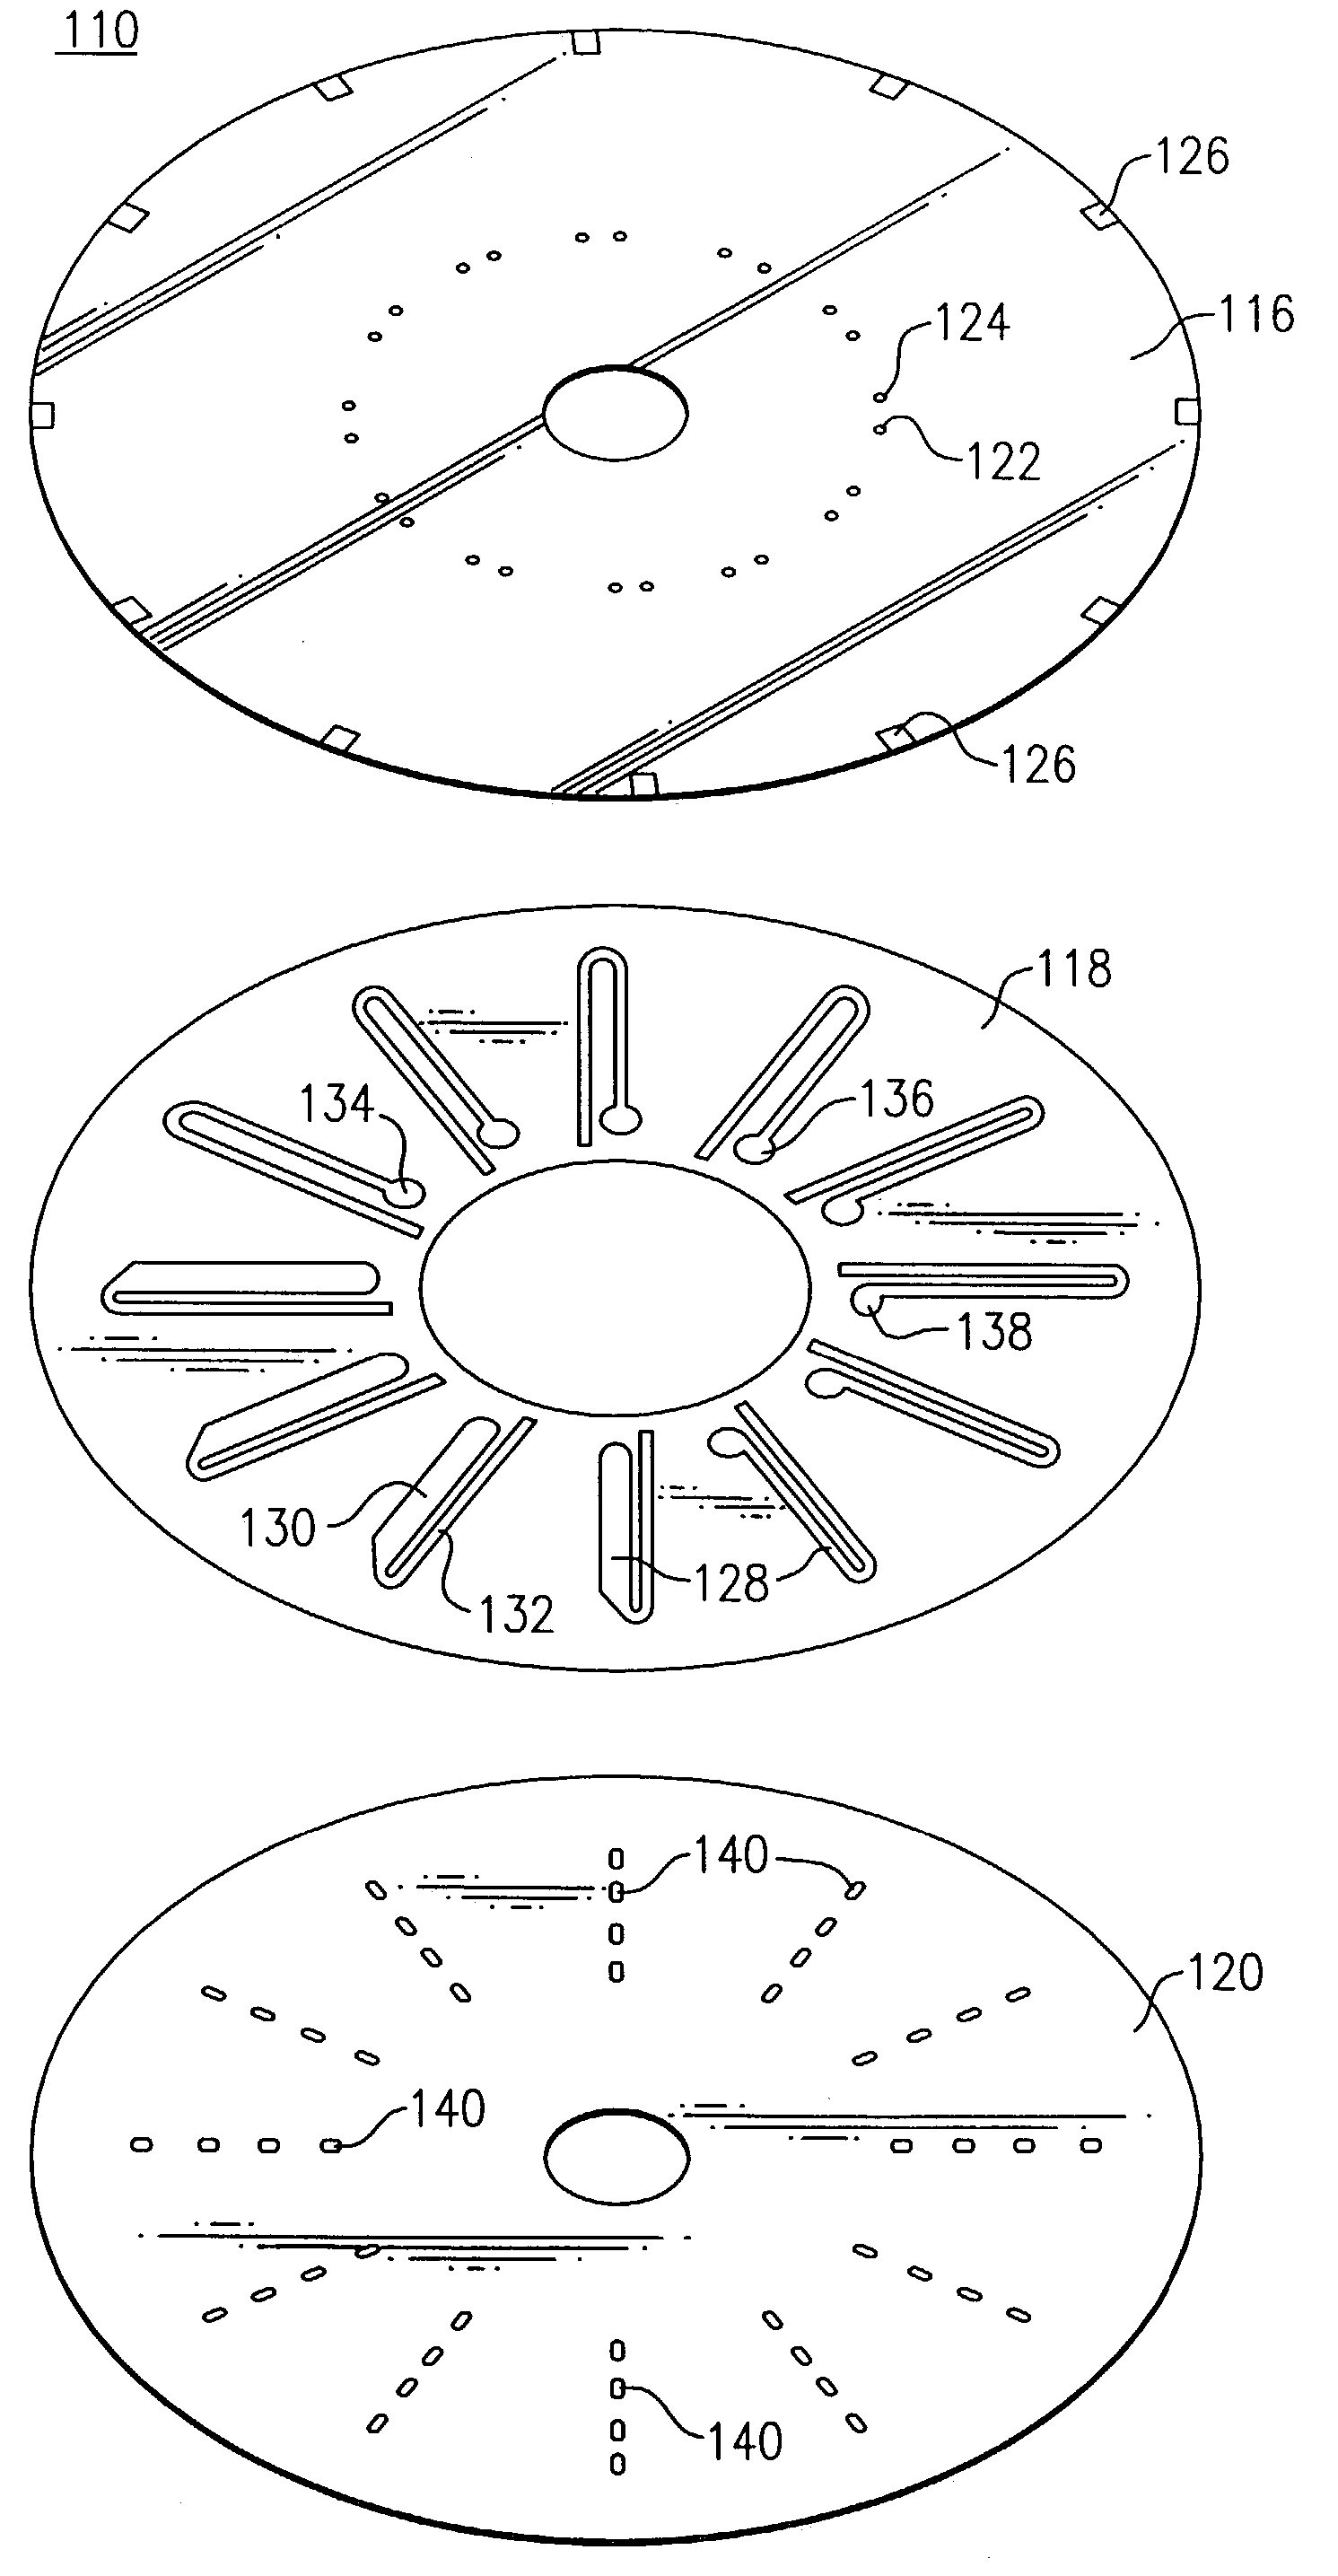 Multi-purpose optical analysis disc for conducting assays and related methods for attaching capture agents